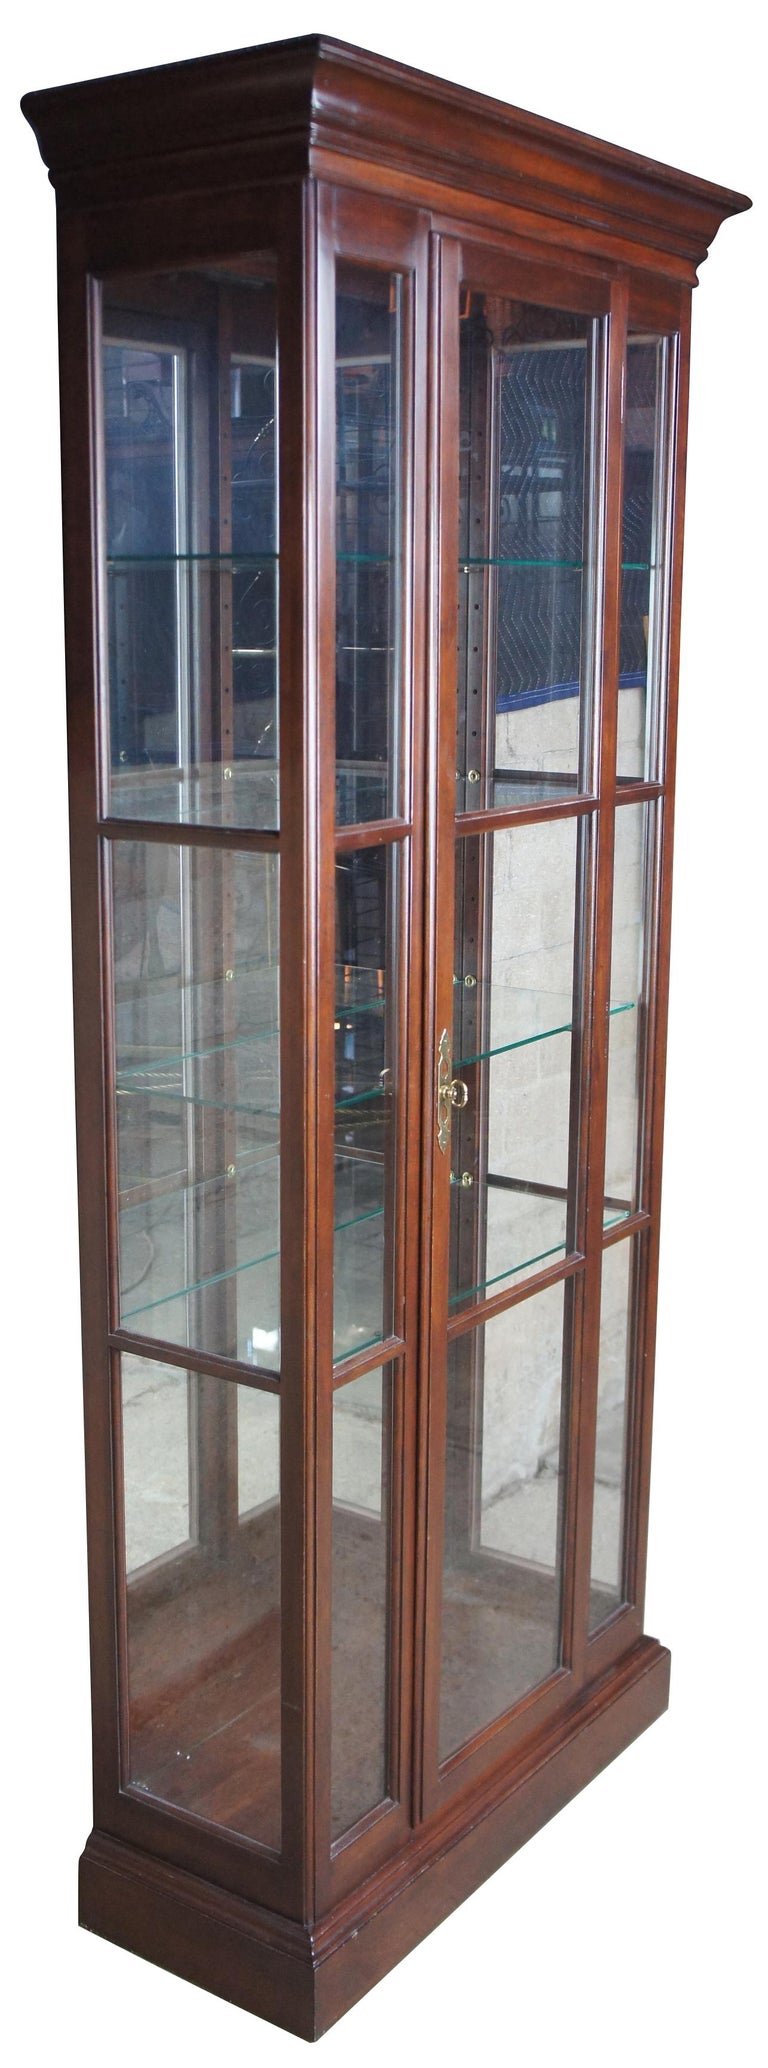 1985 Ethan Allen Georgian Court Solid Cherry Curio Display Cabinet 11-9019 In Good Condition In Dayton, OH